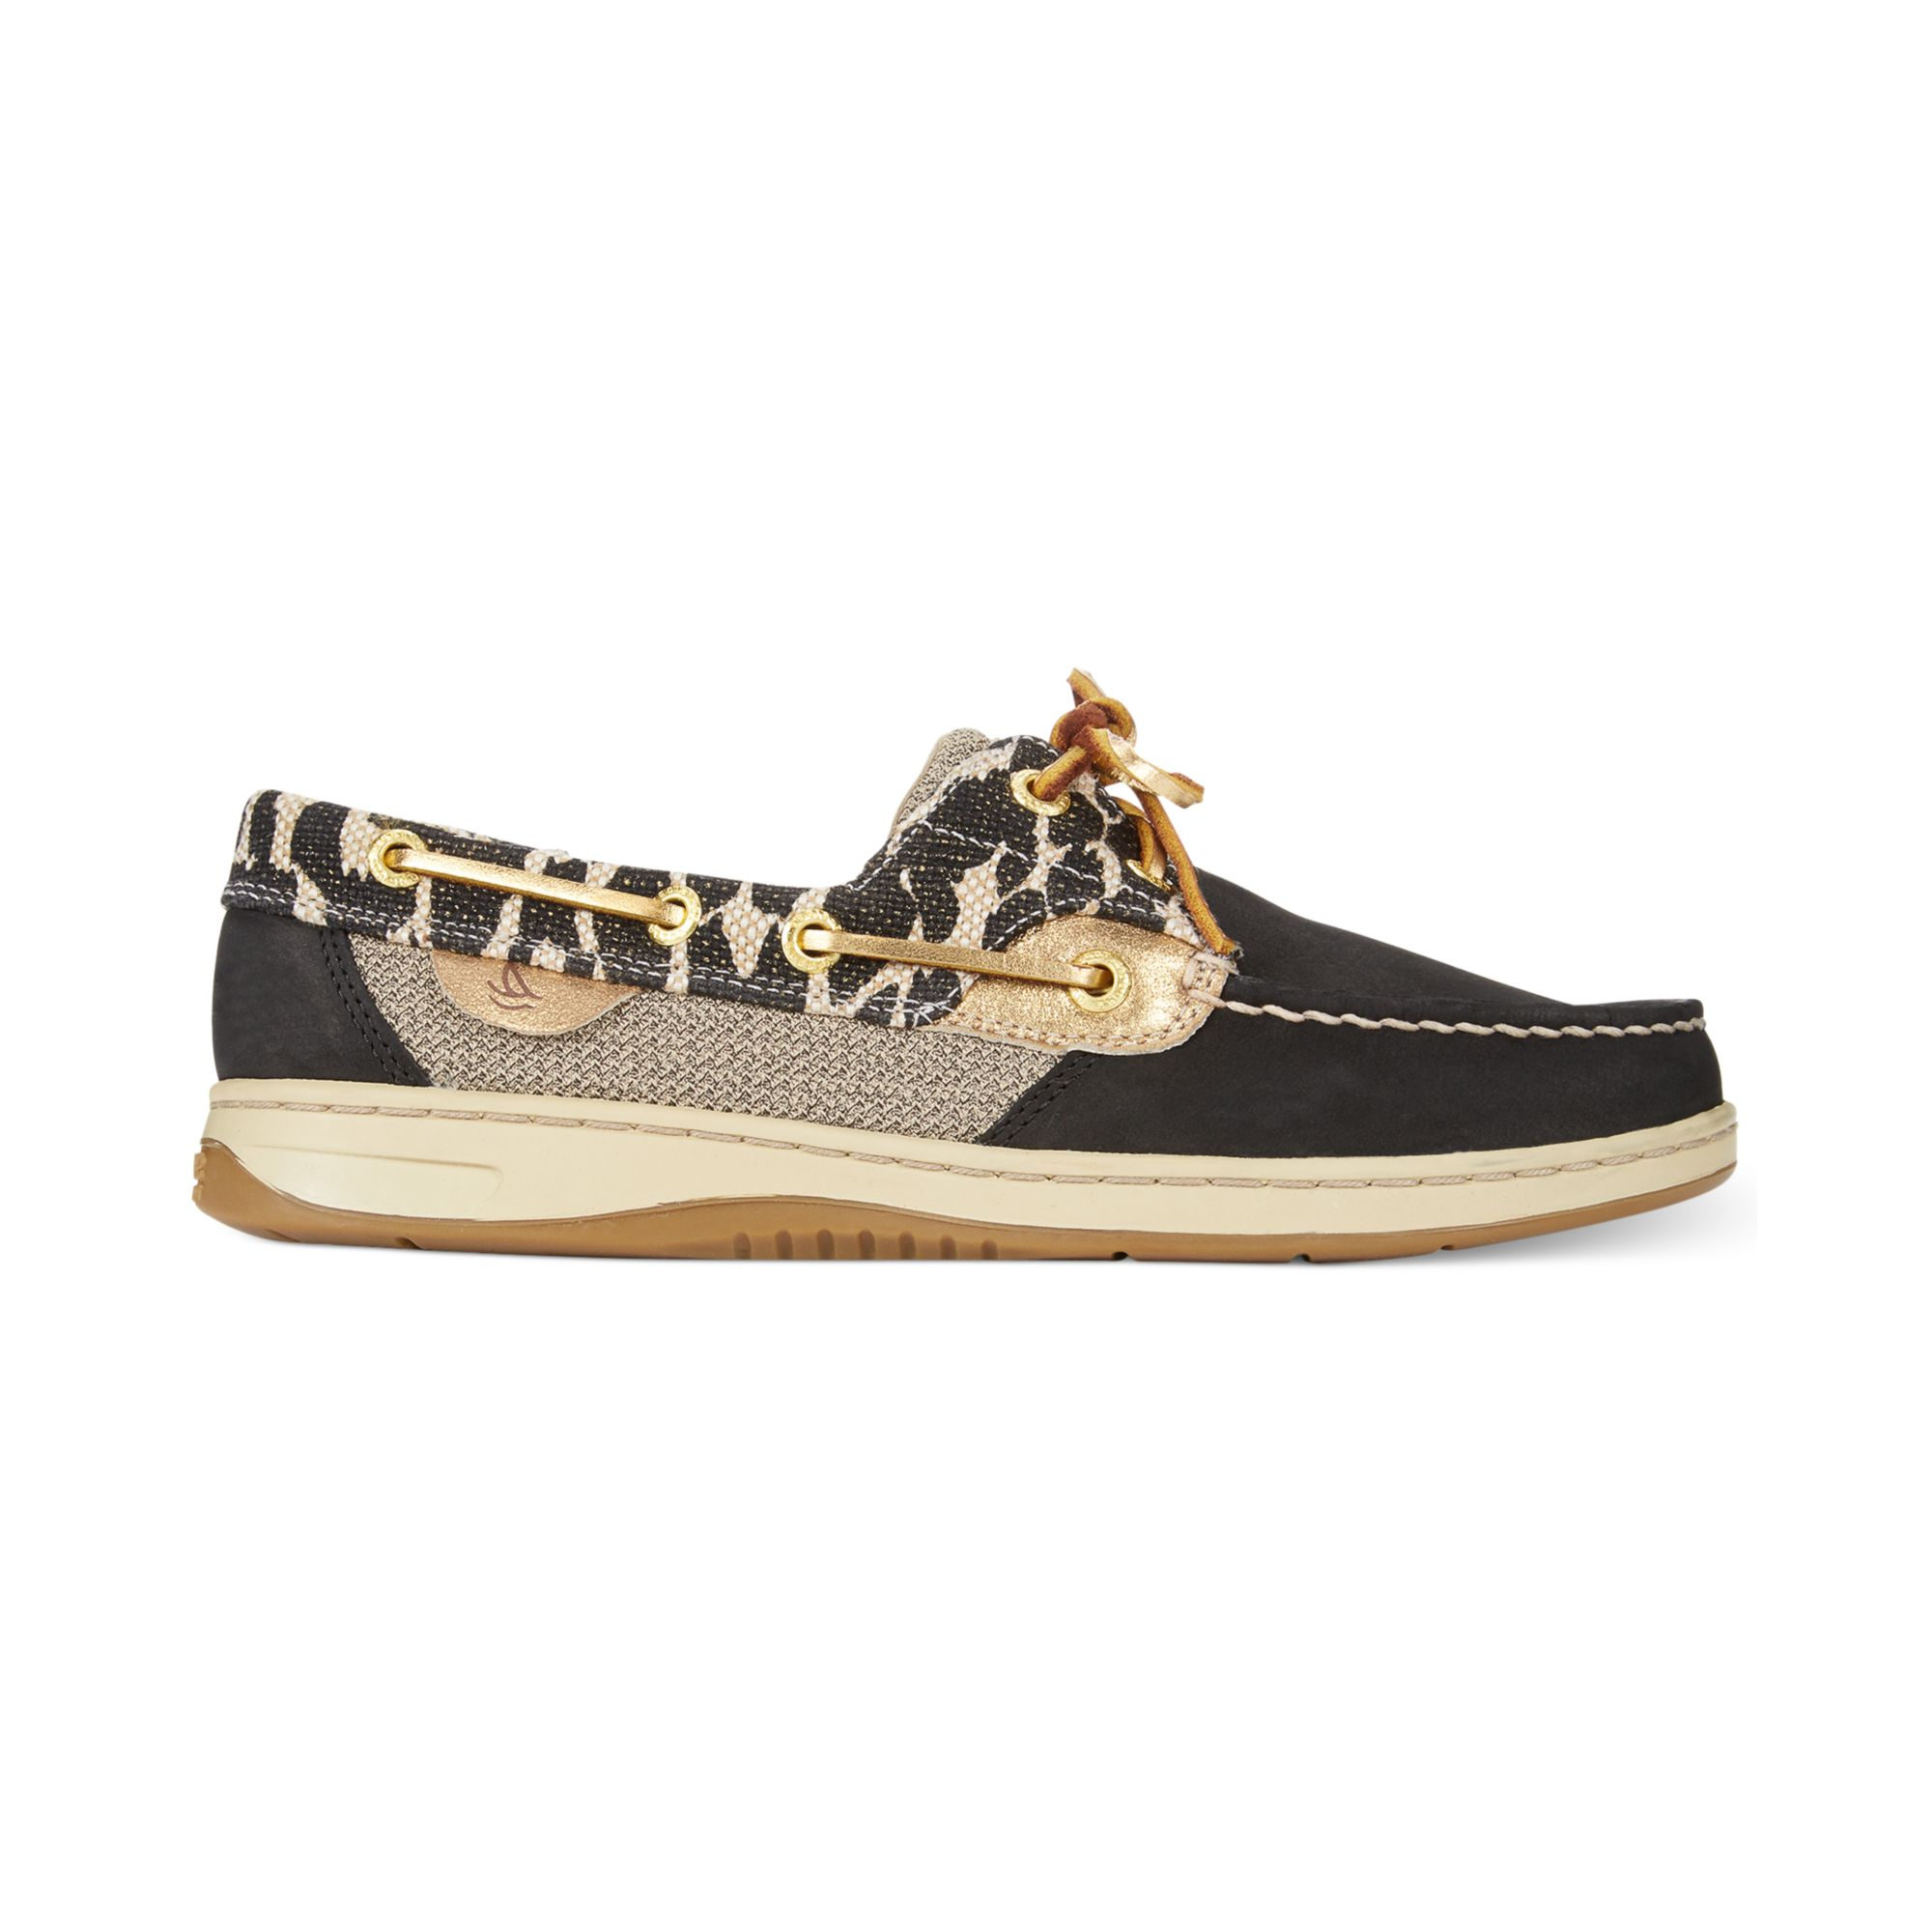 Sperry top-sider Women's Bluefish Boat Shoes in Black ...